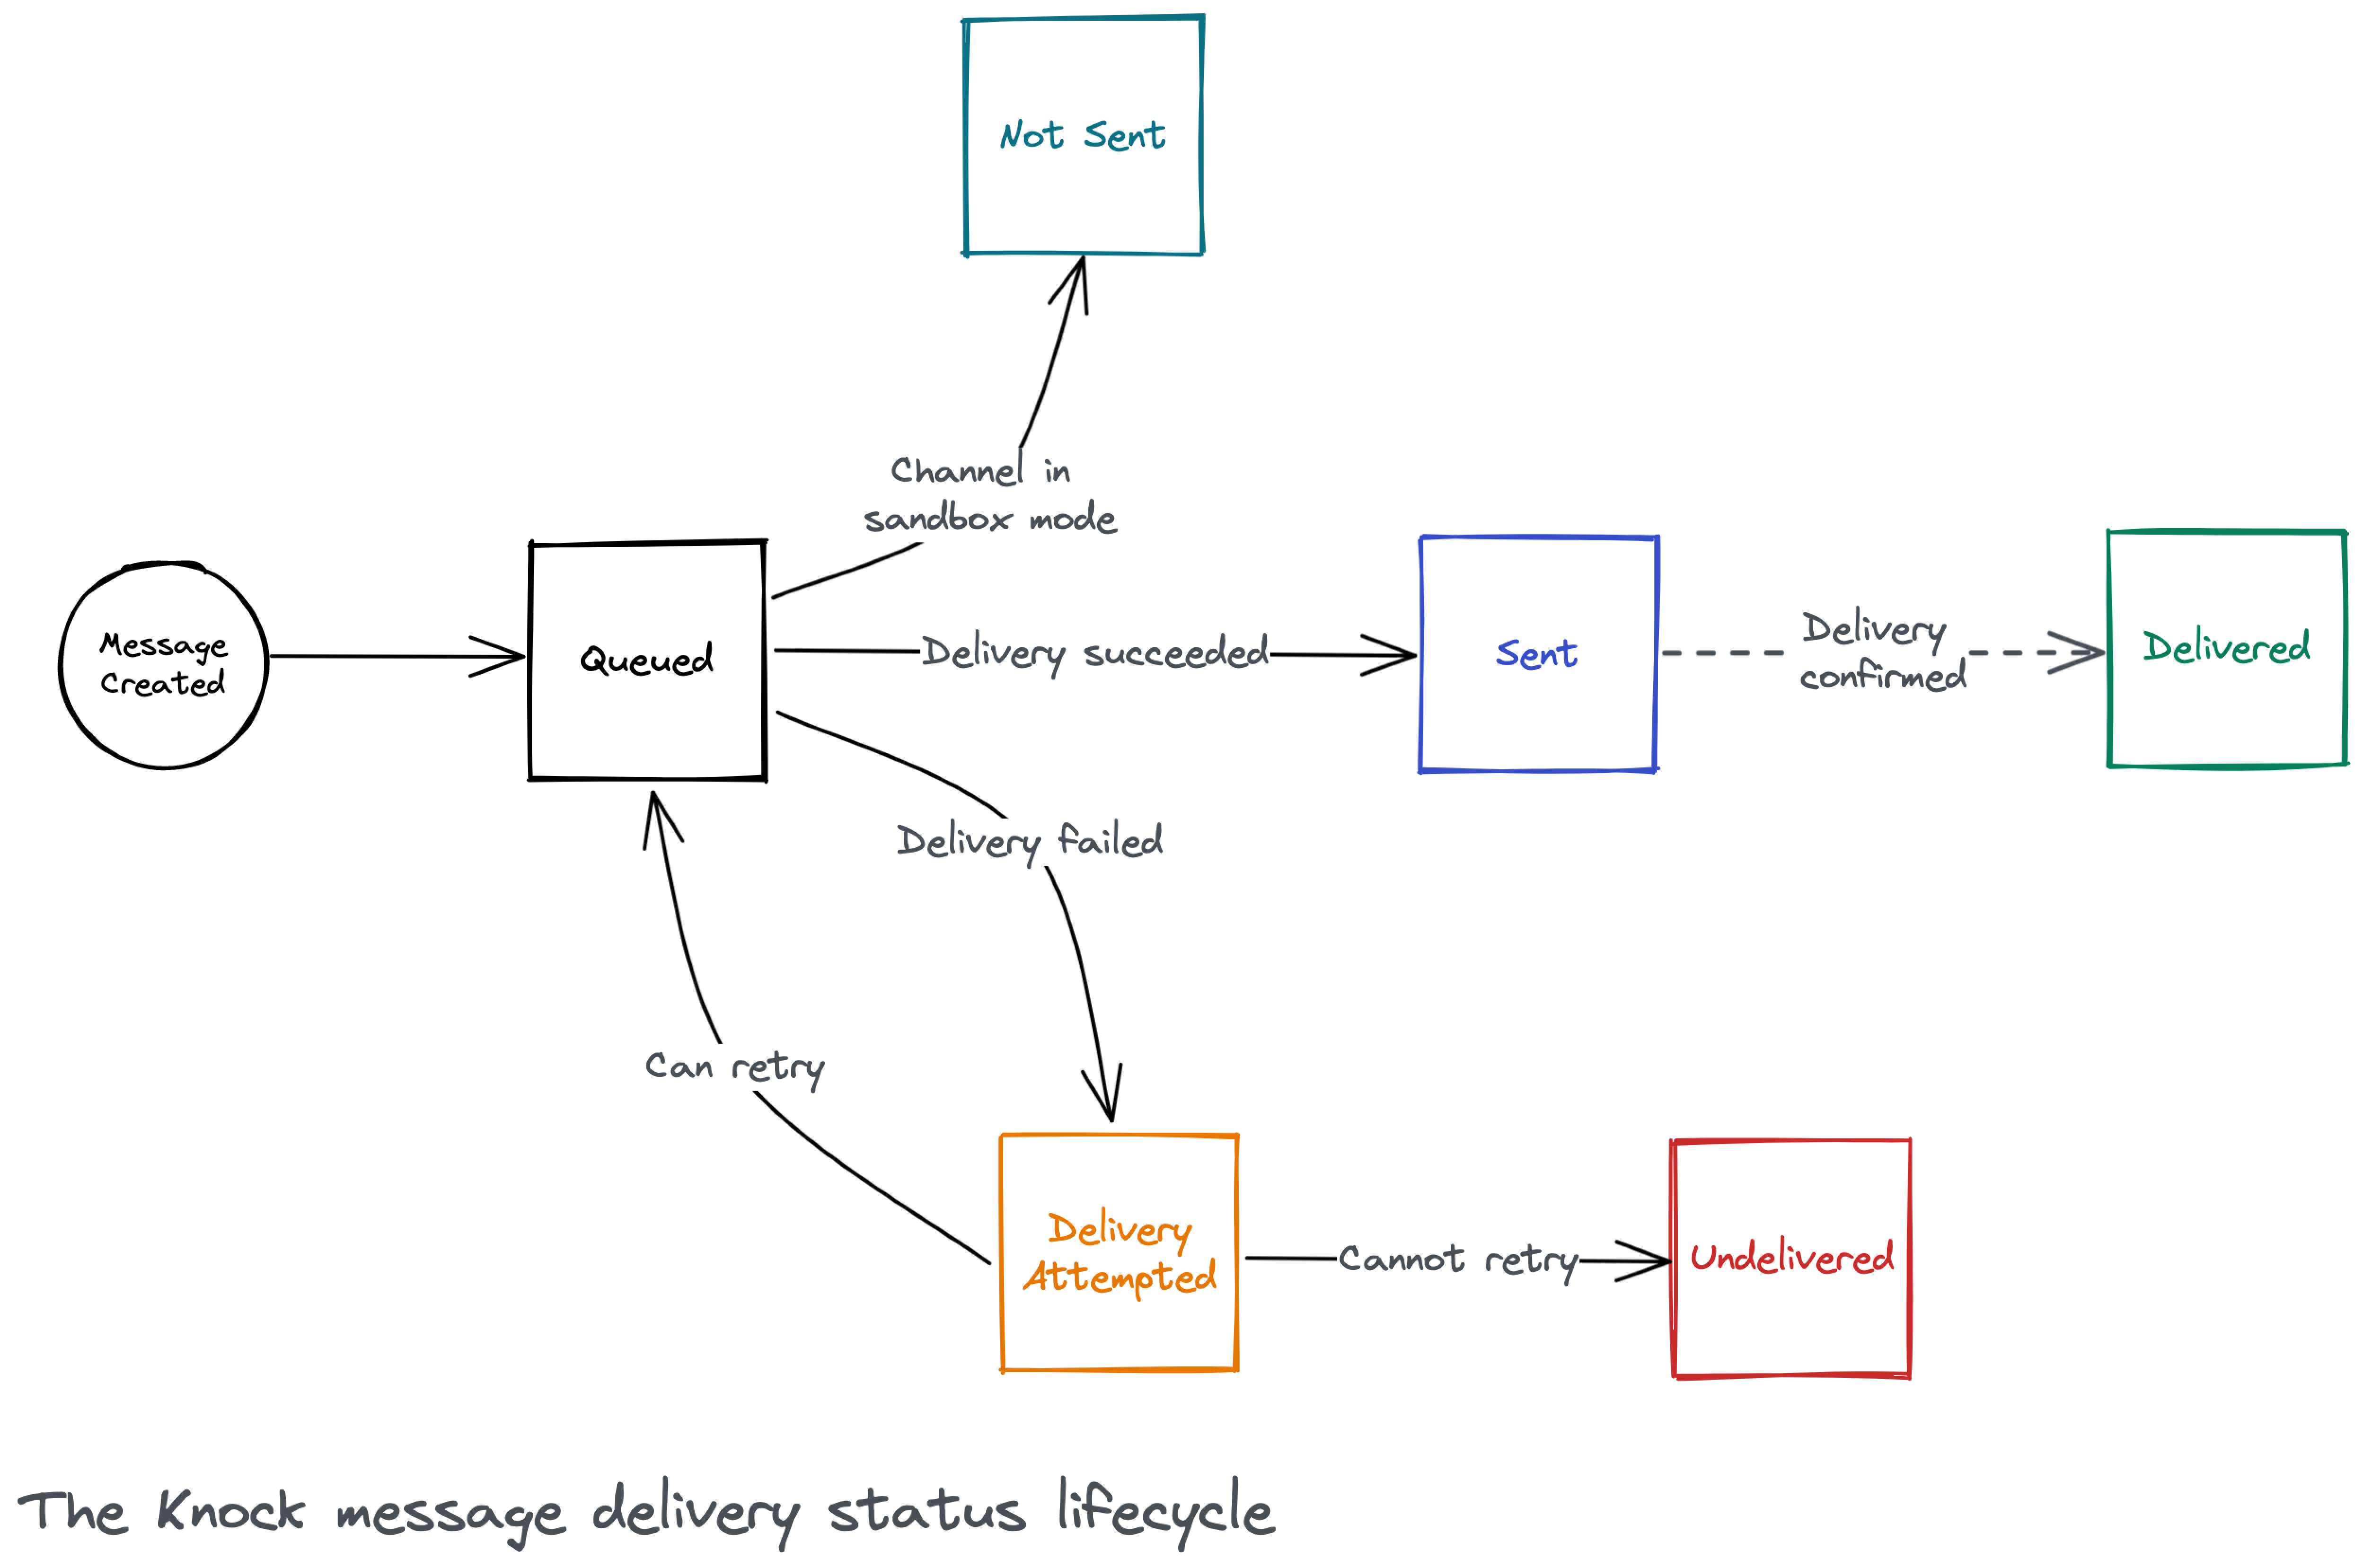 Knock message delivery status lifecycle